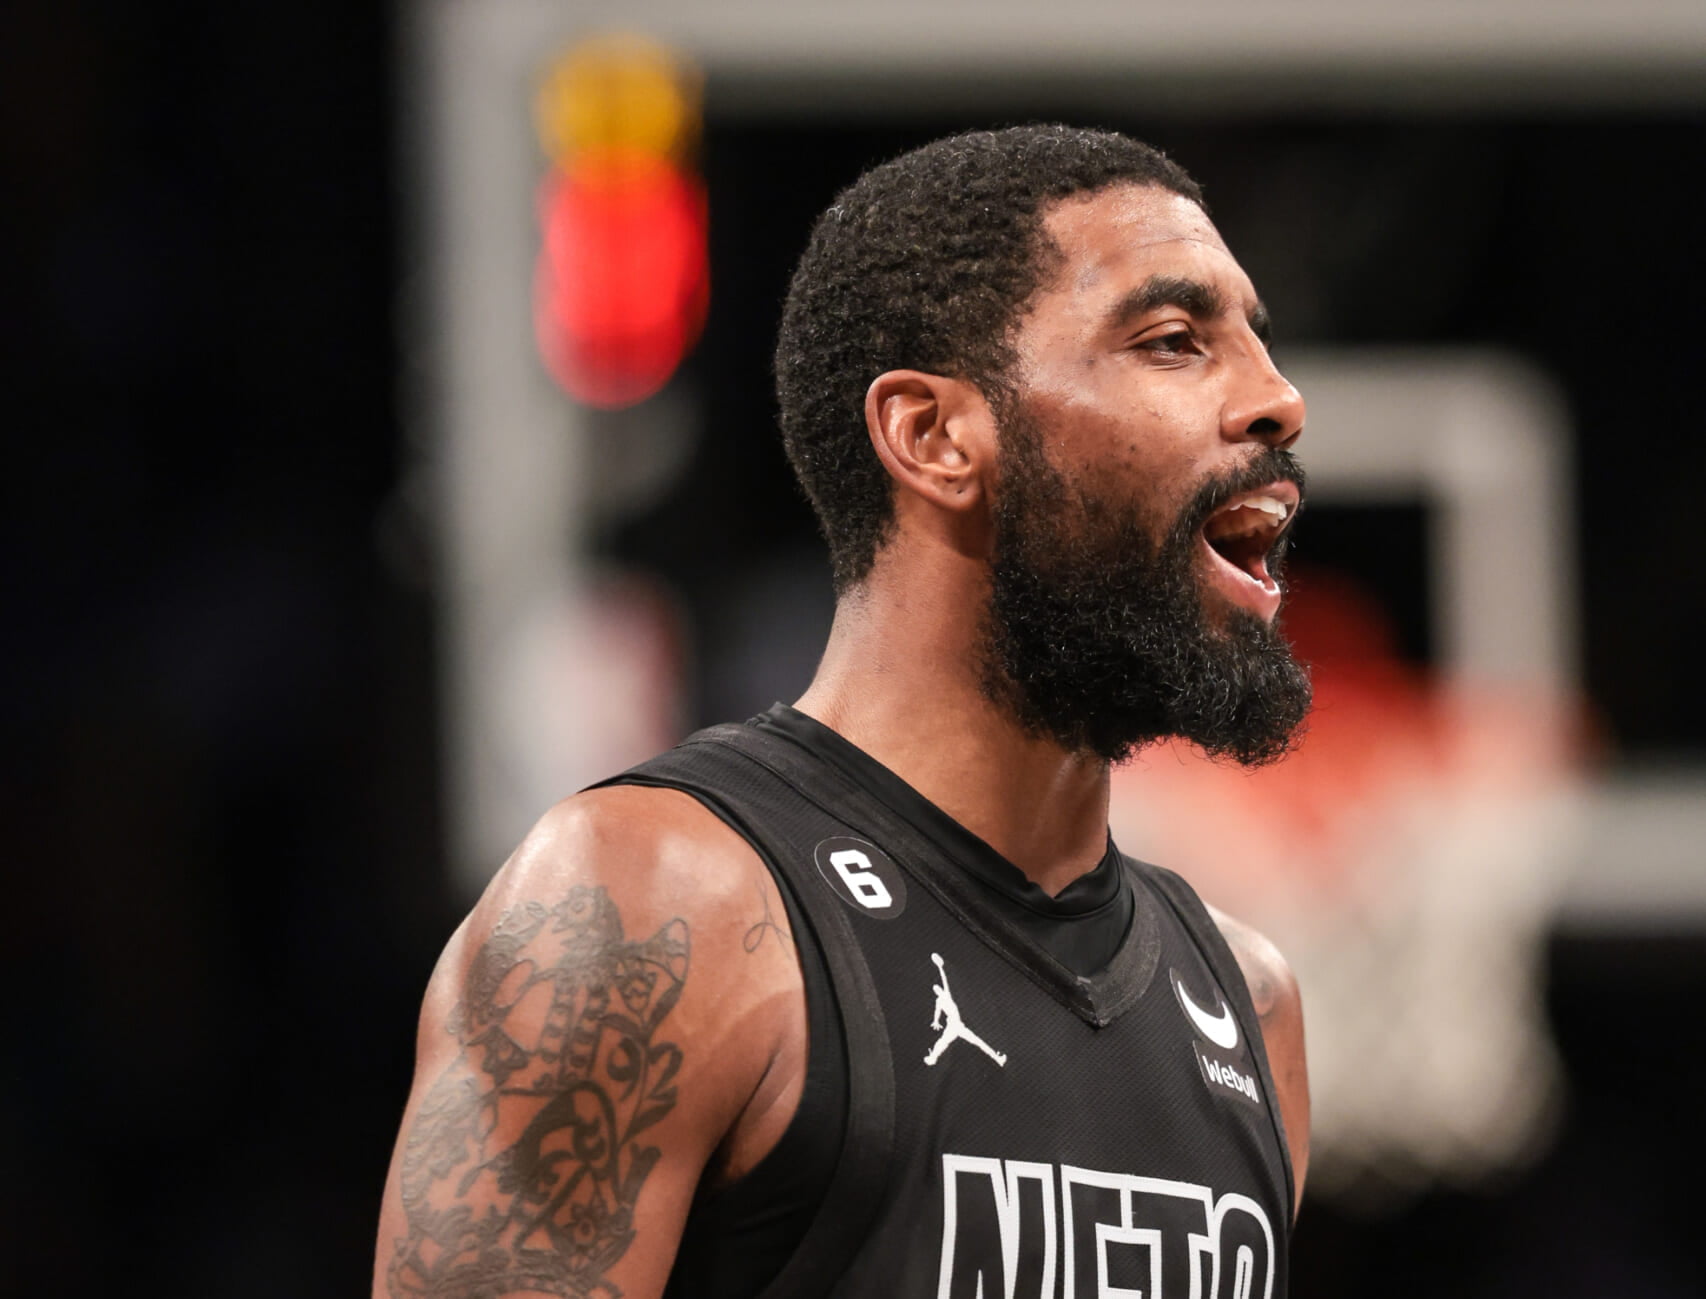 Kyrie Irving’s suspension could be over soon after meeting with Brooklyn Nets owner